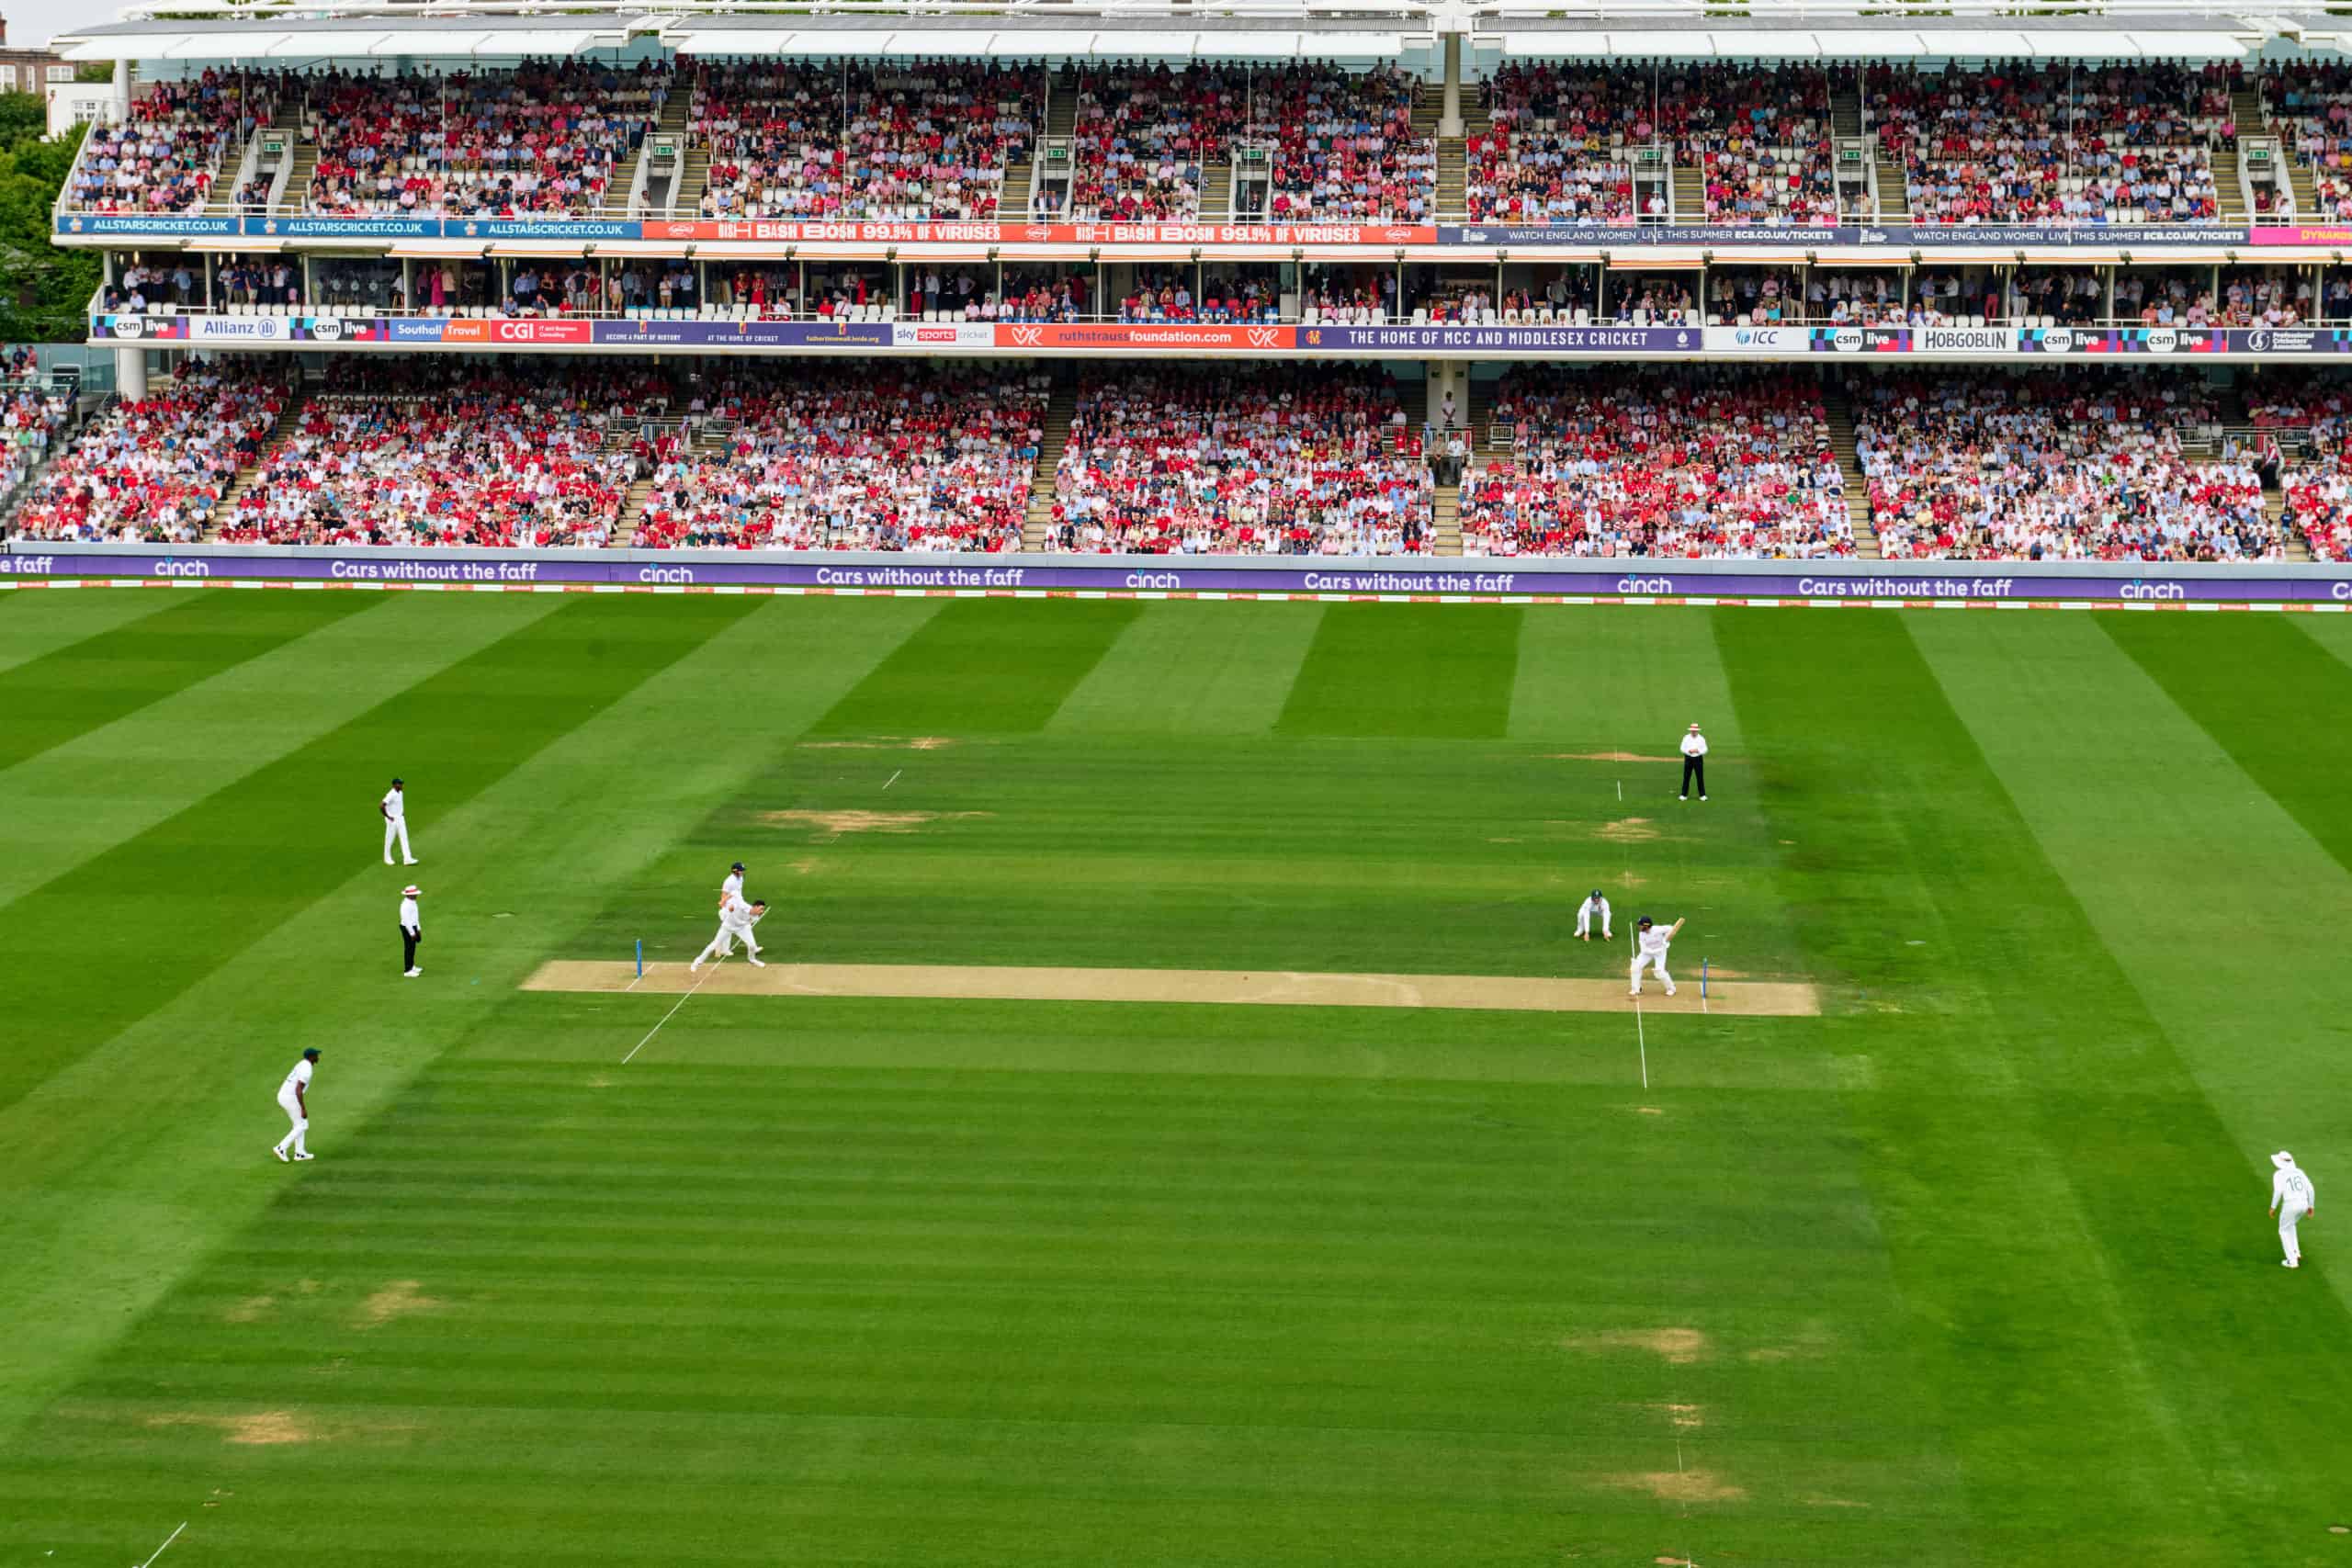 How will Bazball affect the outcome of the Ashes in the Summer?